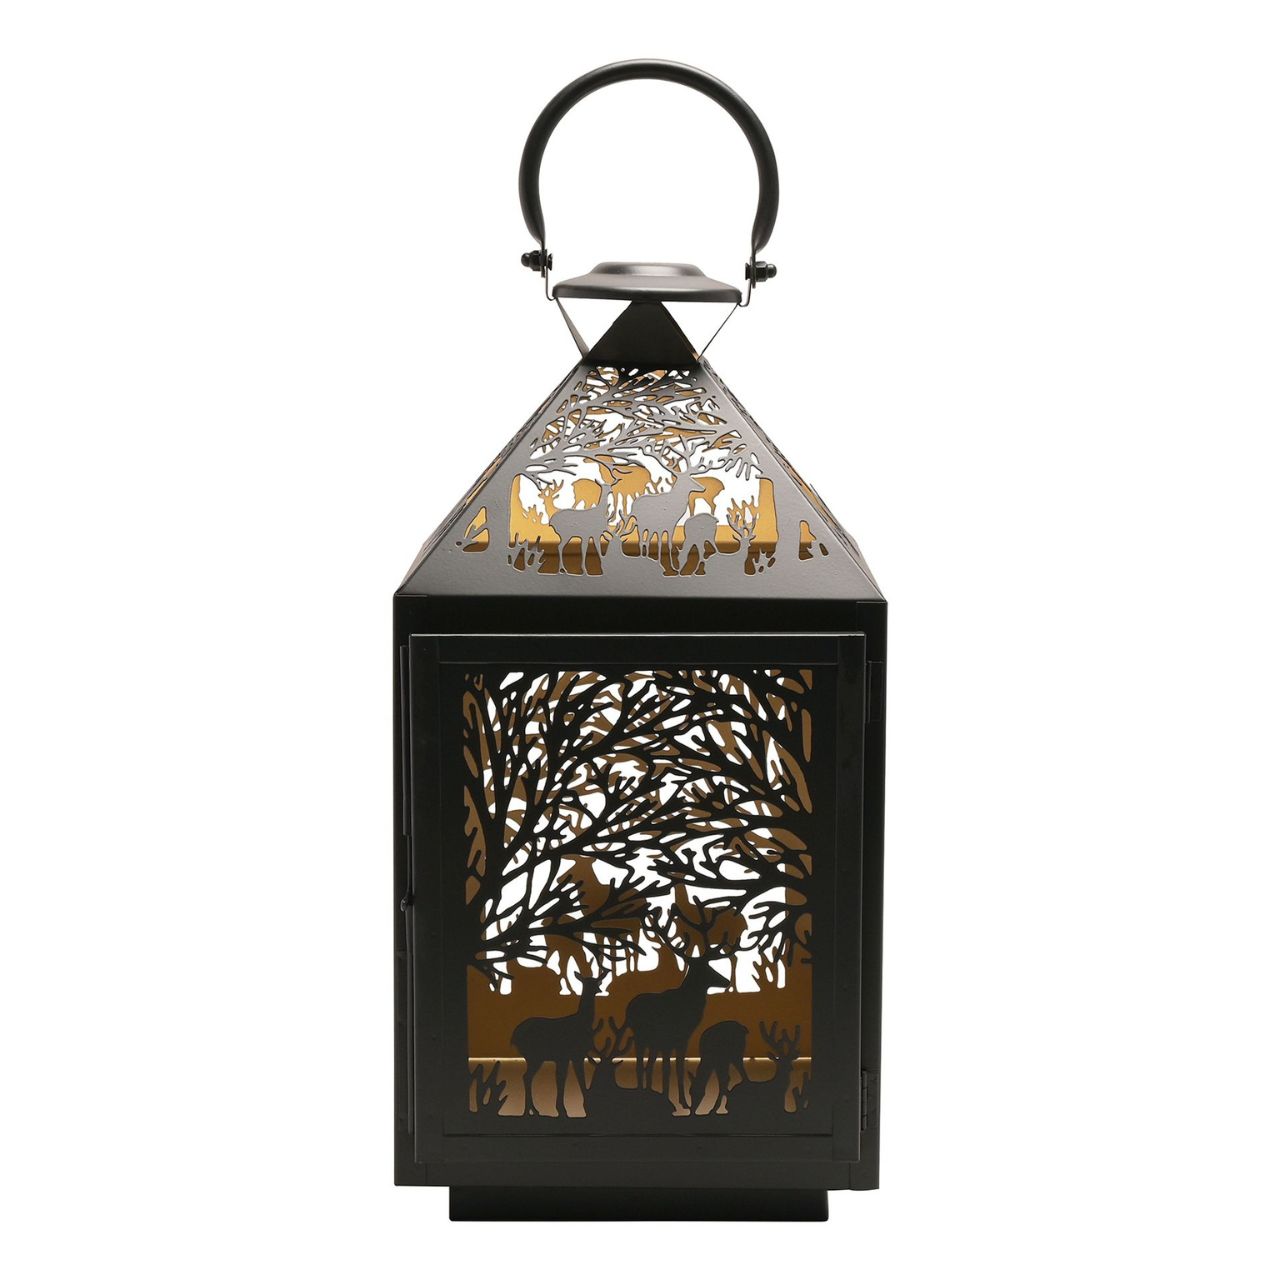 Stag Silhouette Christmas Lantern Square  A square stag silhouette lantern.  This enchanting lantern glistens with festive charm throughout the Christmas period.